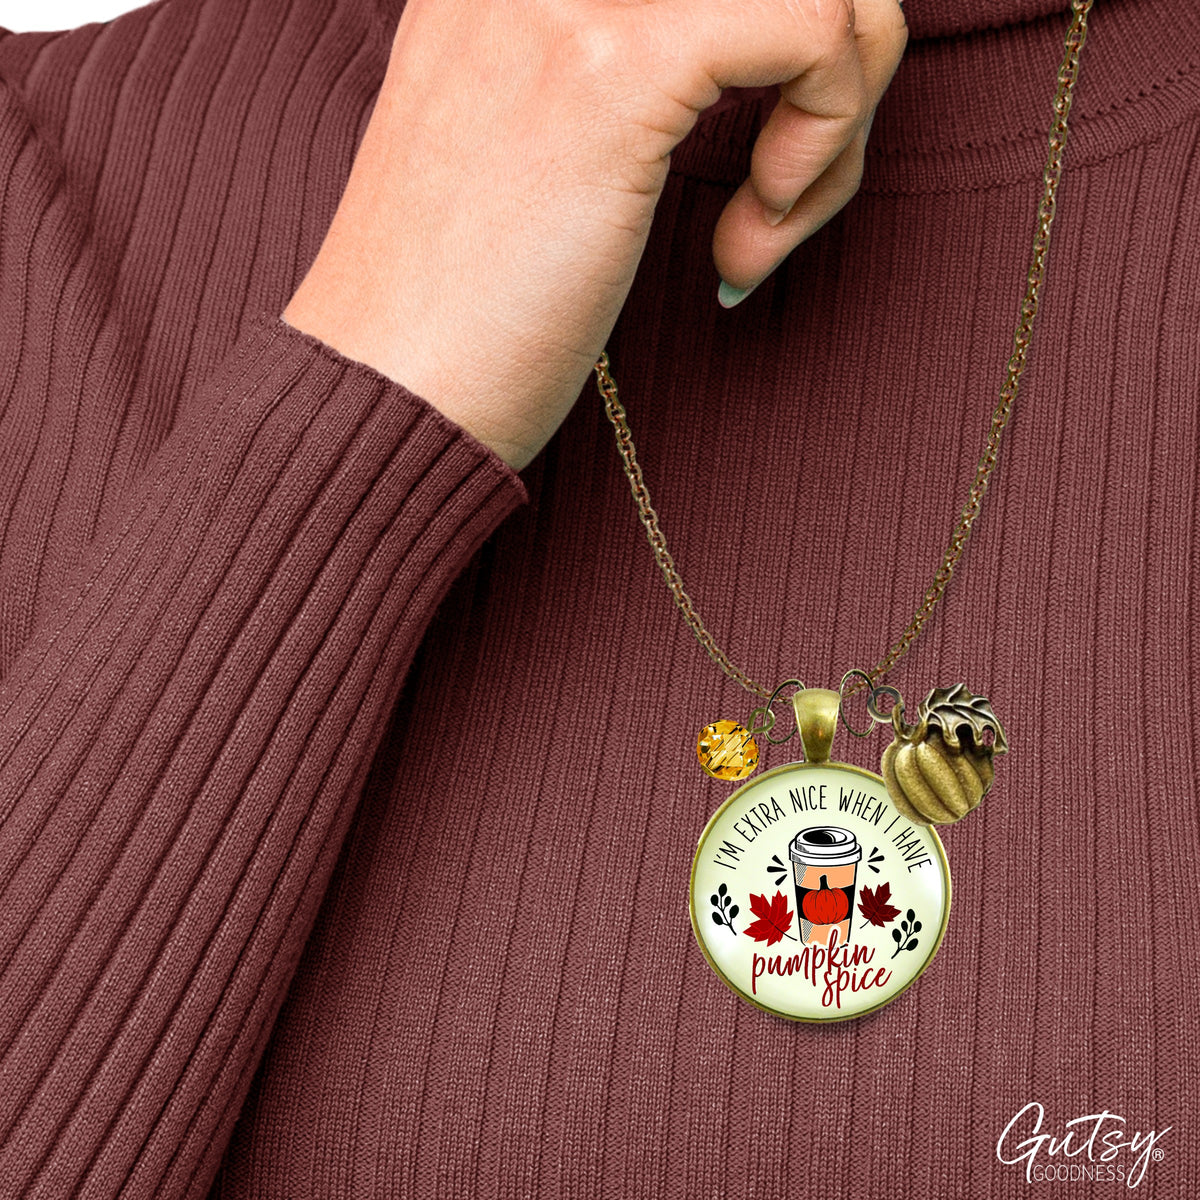 Pumpkin Spice Necklace Extra Nice Latte Coffee Lover Everything Autumn Funny Merch Gift Jewelry For Women  Necklace - Gutsy Goodness Handmade Jewelry